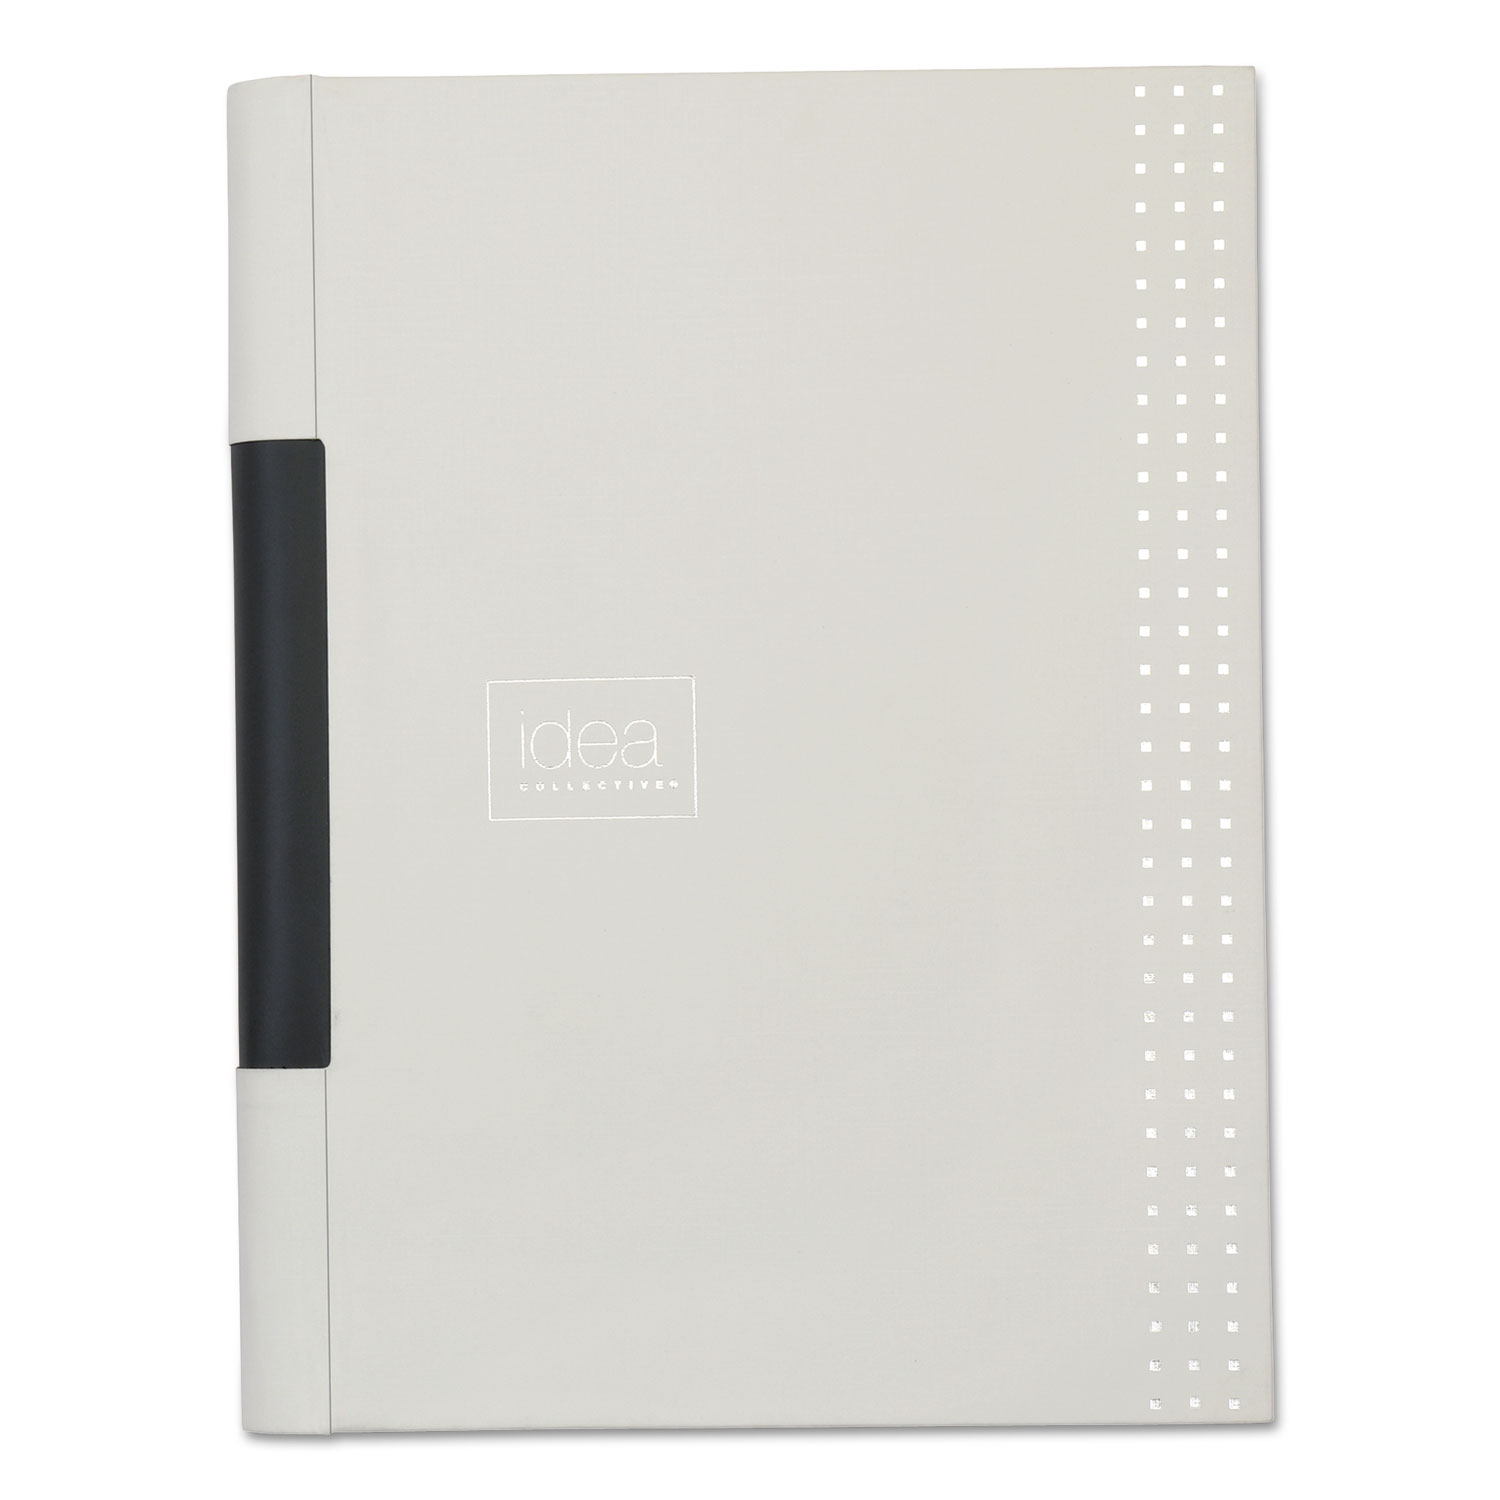  Oxford 56894 Idea Collective Professional Casebound Notebook, White, 5 7/8 x 8 1/4, 80 Pages (TOP56894) 